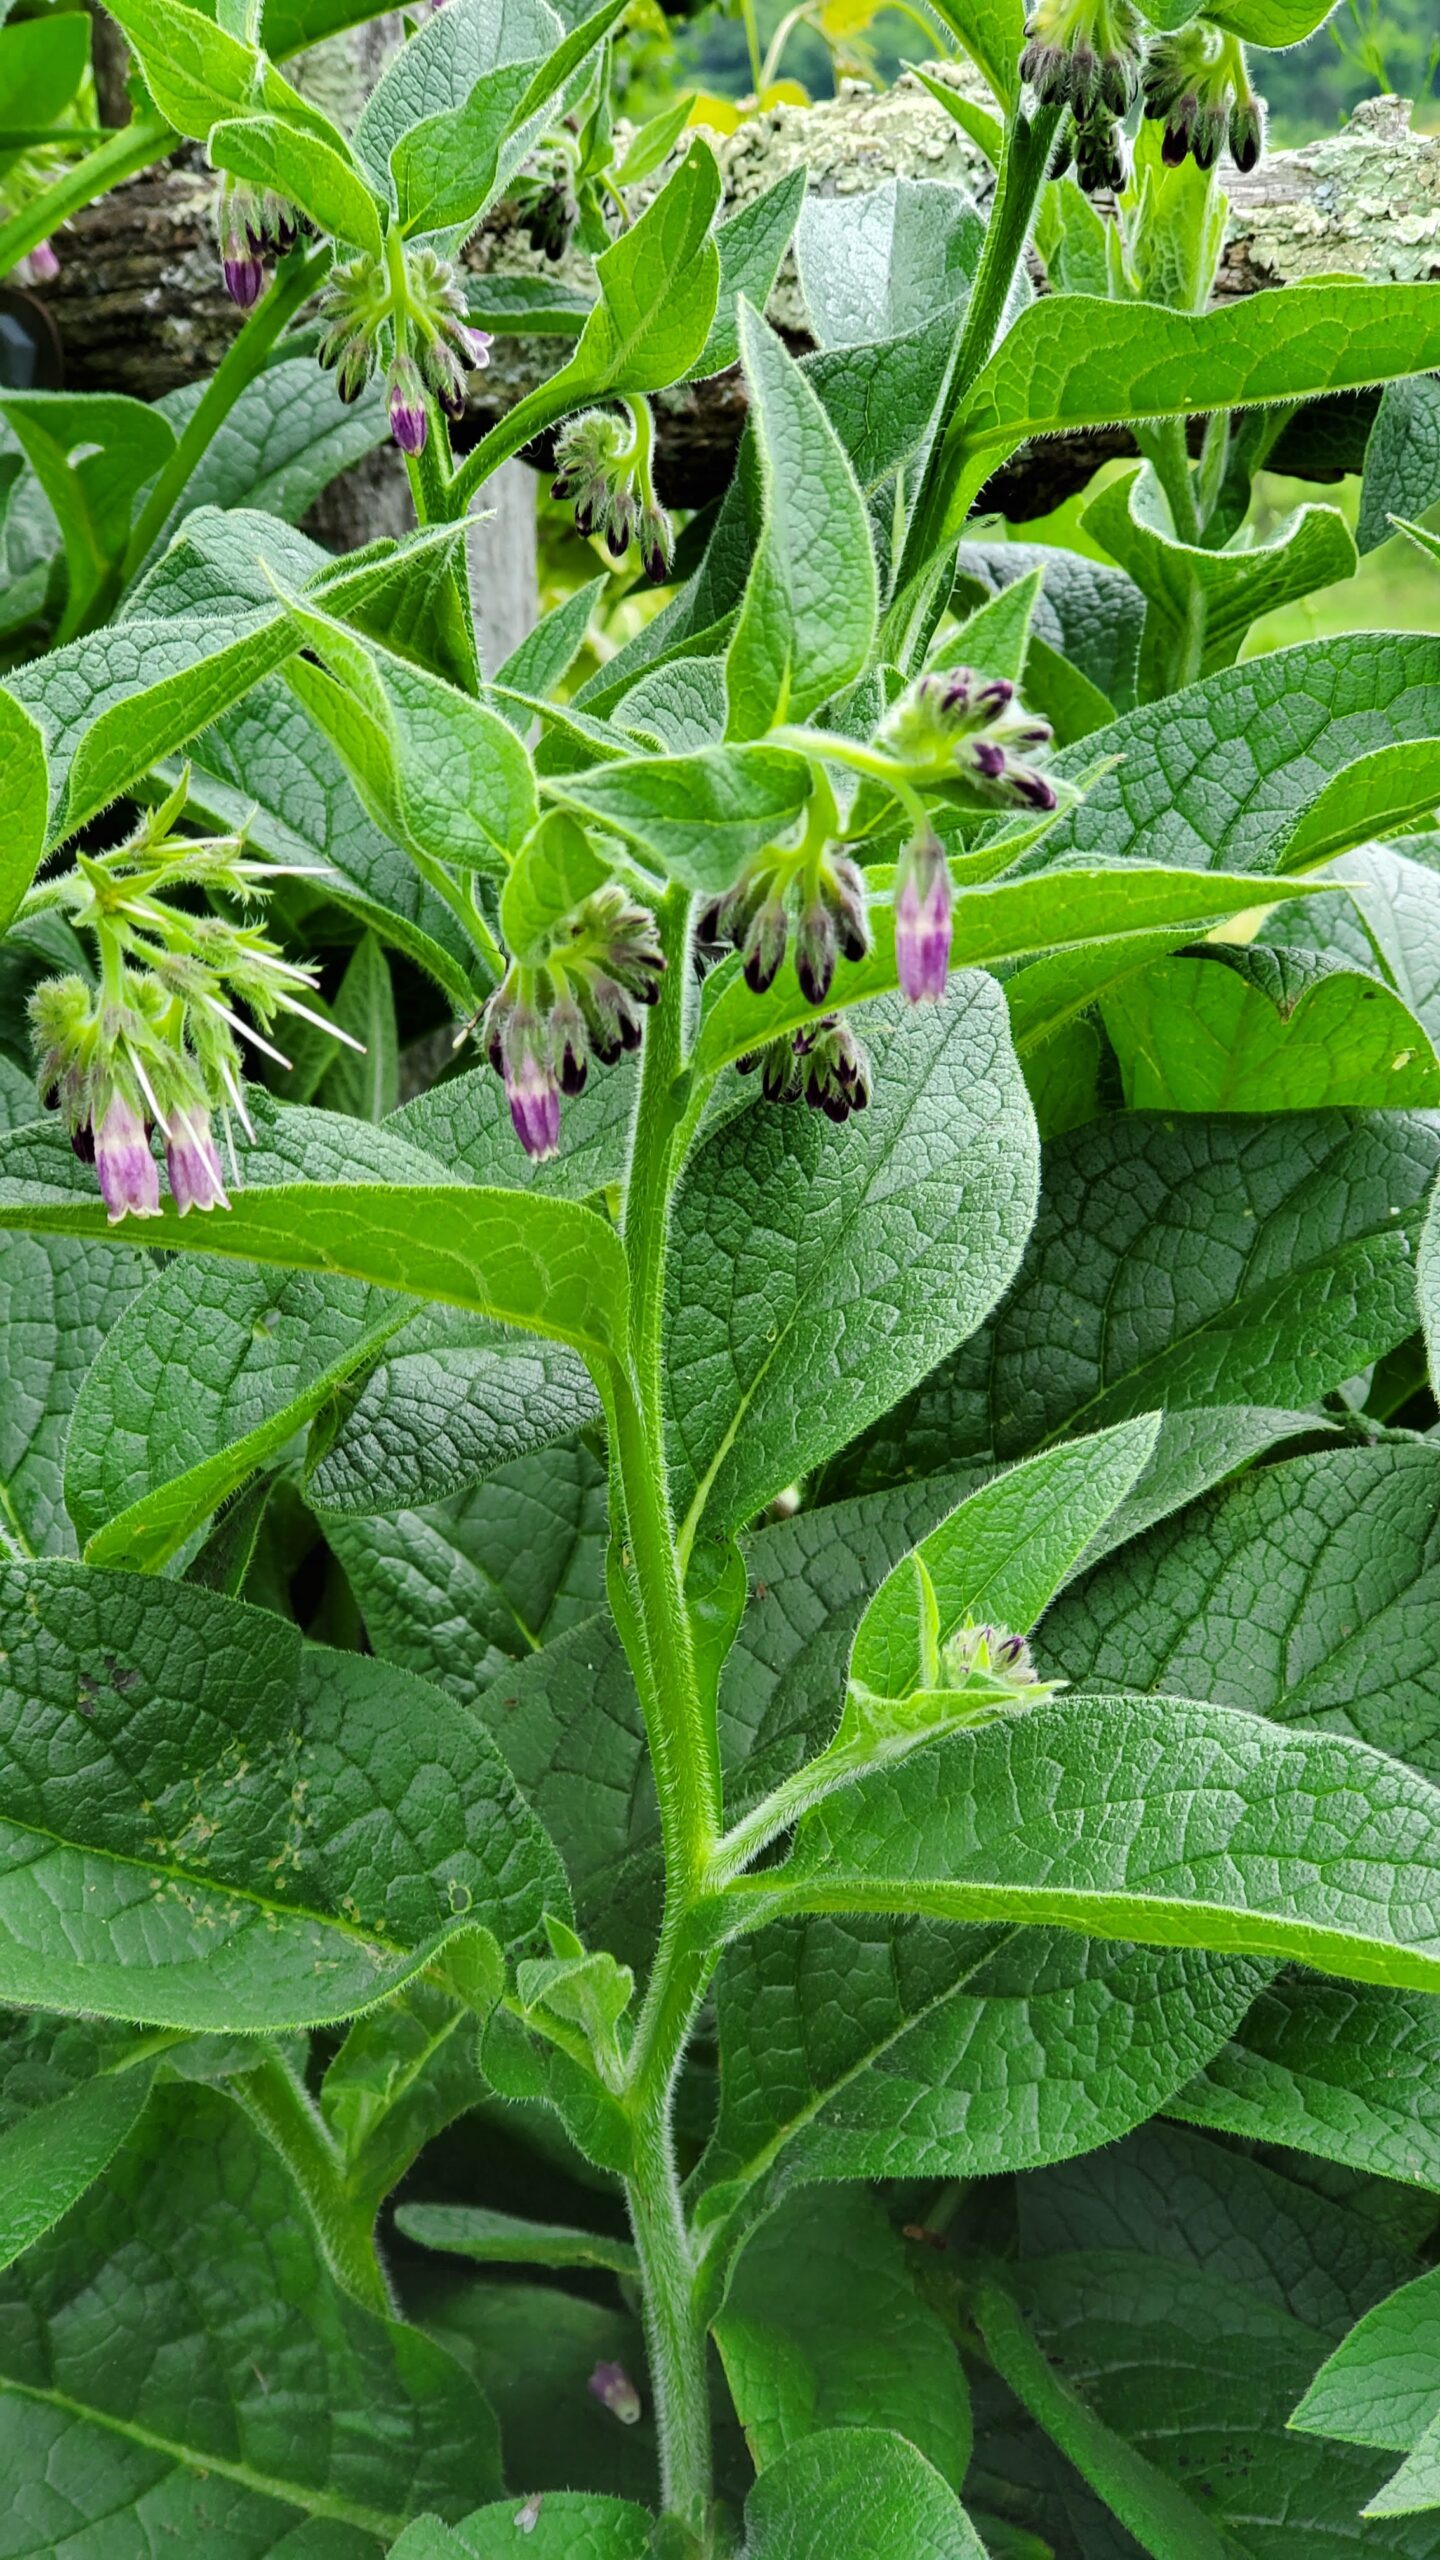 Bocking 14 Russian Comfrey Live Root Cuttings 